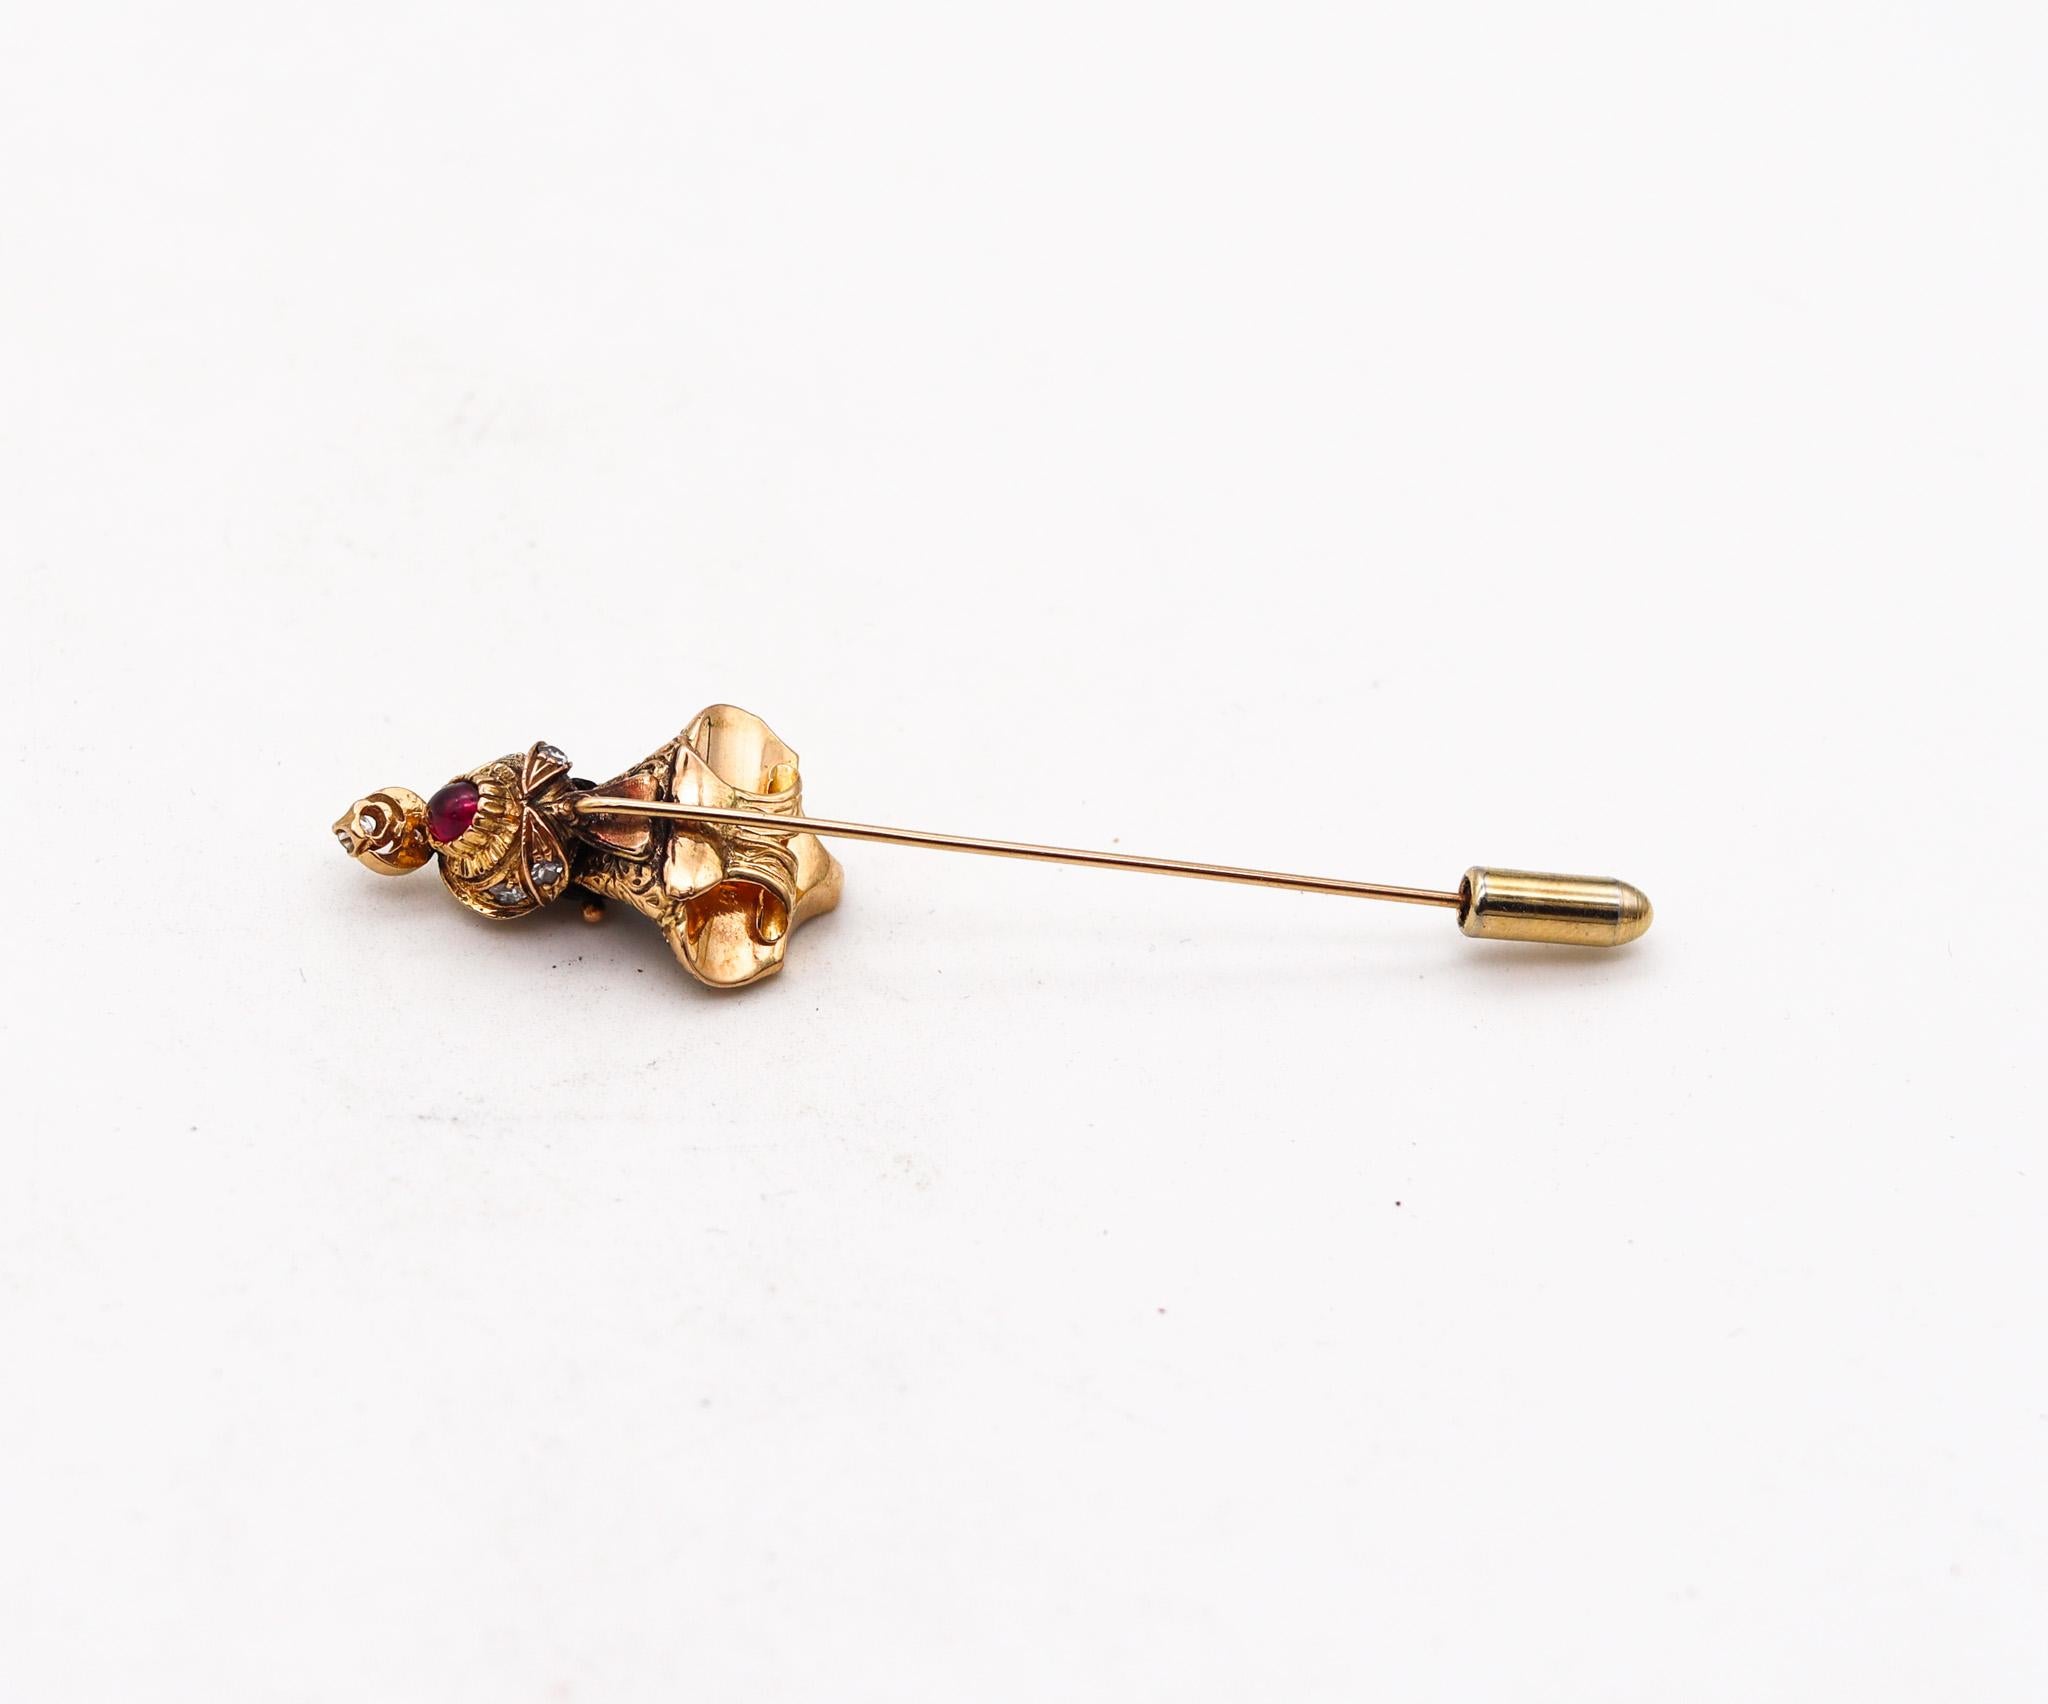 Baroque Revival Nubian Prince Stick Pin In 18Kt Yellow Gold With 2.28 Ctw In Diamonds And Ruby